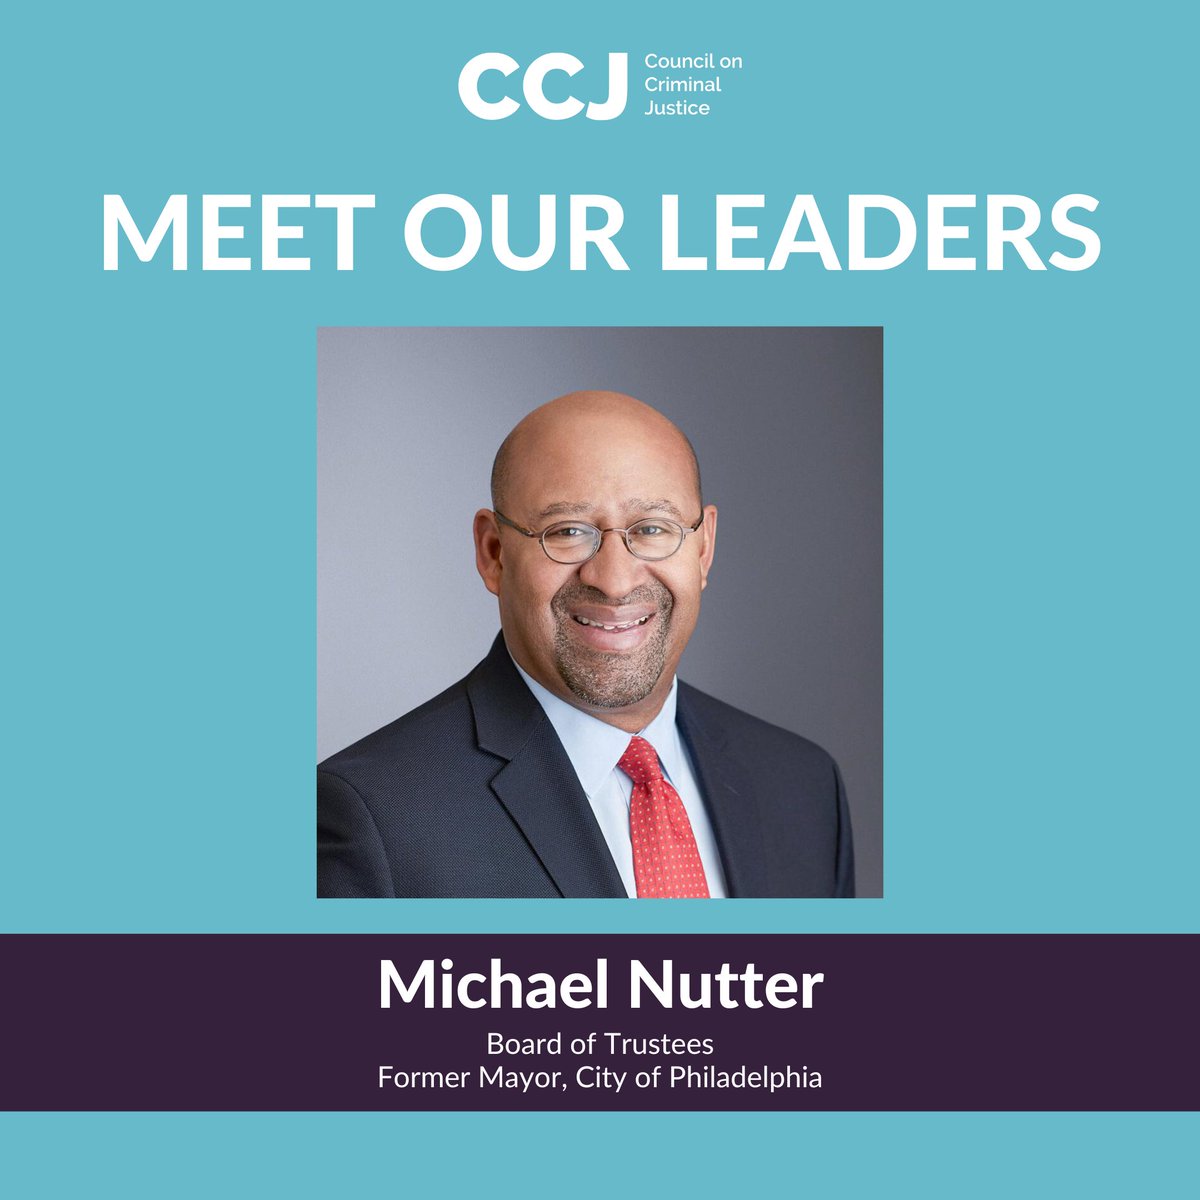 A former 2-term Philadelphia mayor, @Michael_Nutter is a veteran public service professional whose multiple roles at CCJ include serving on the Board of Trustees, the Task Force on Policing, and, currently, the Crime Trends Working Group.